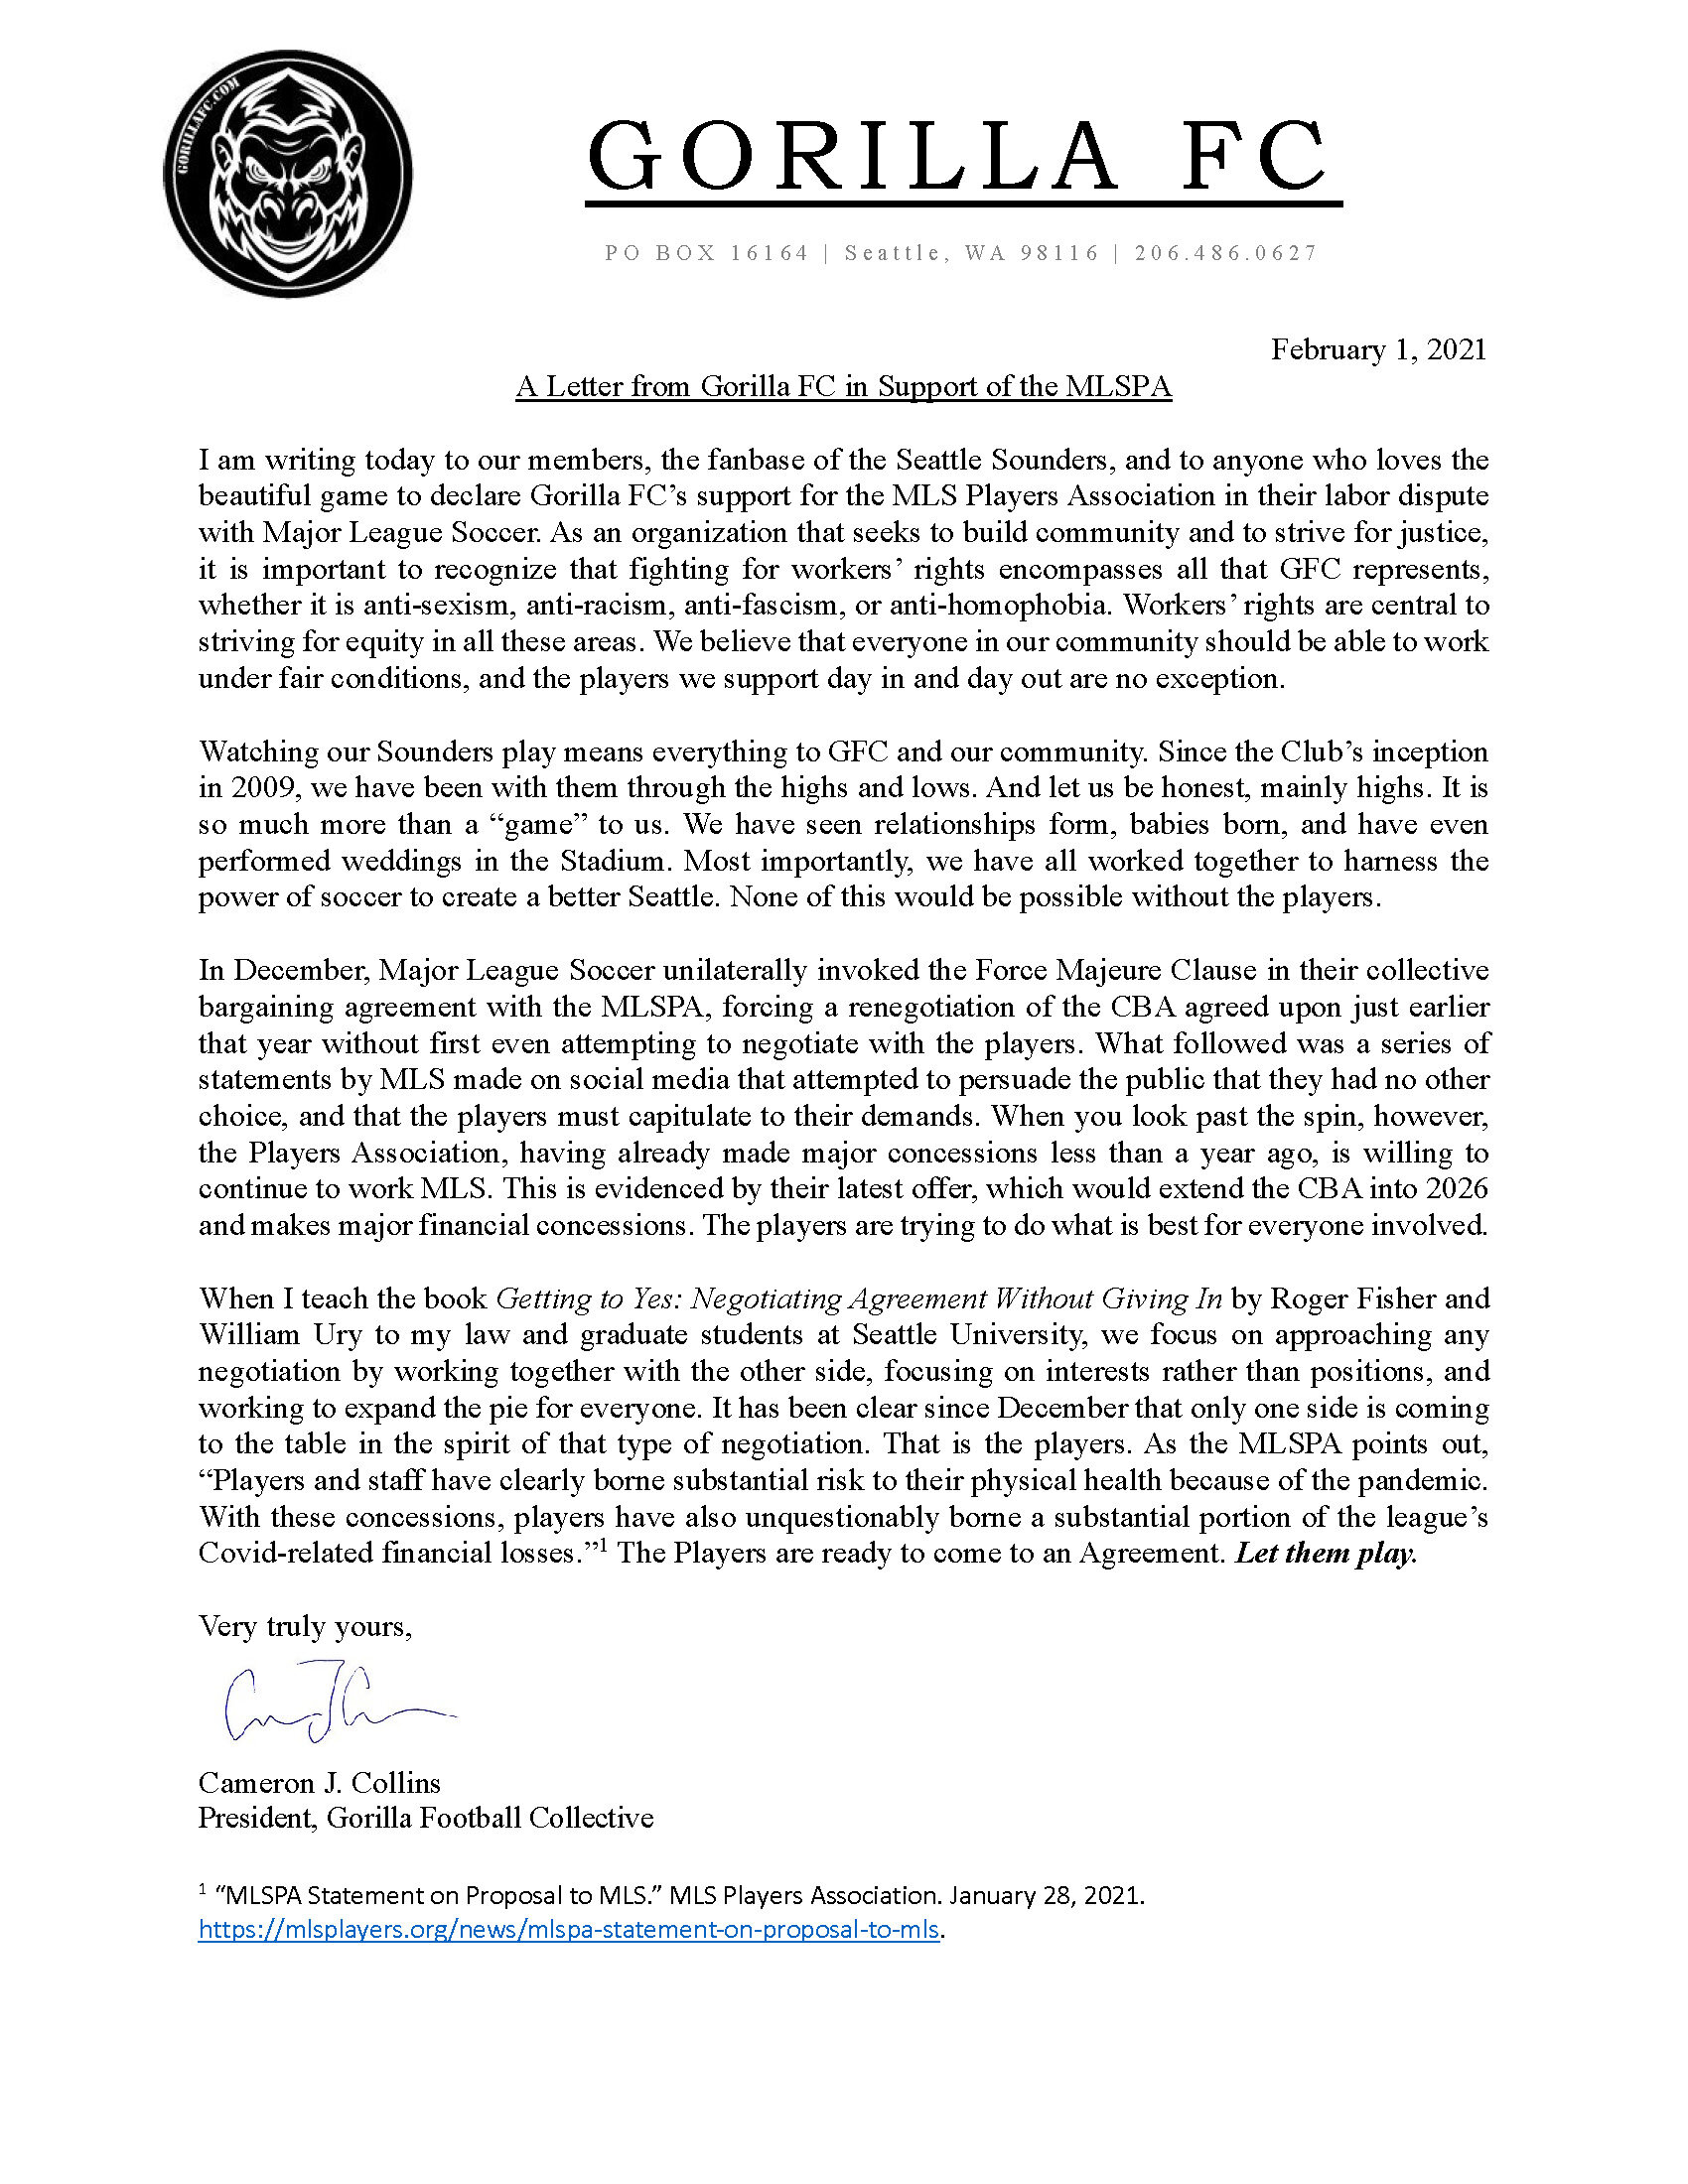 GFC Letter in Support of the MLSPA image.jpg